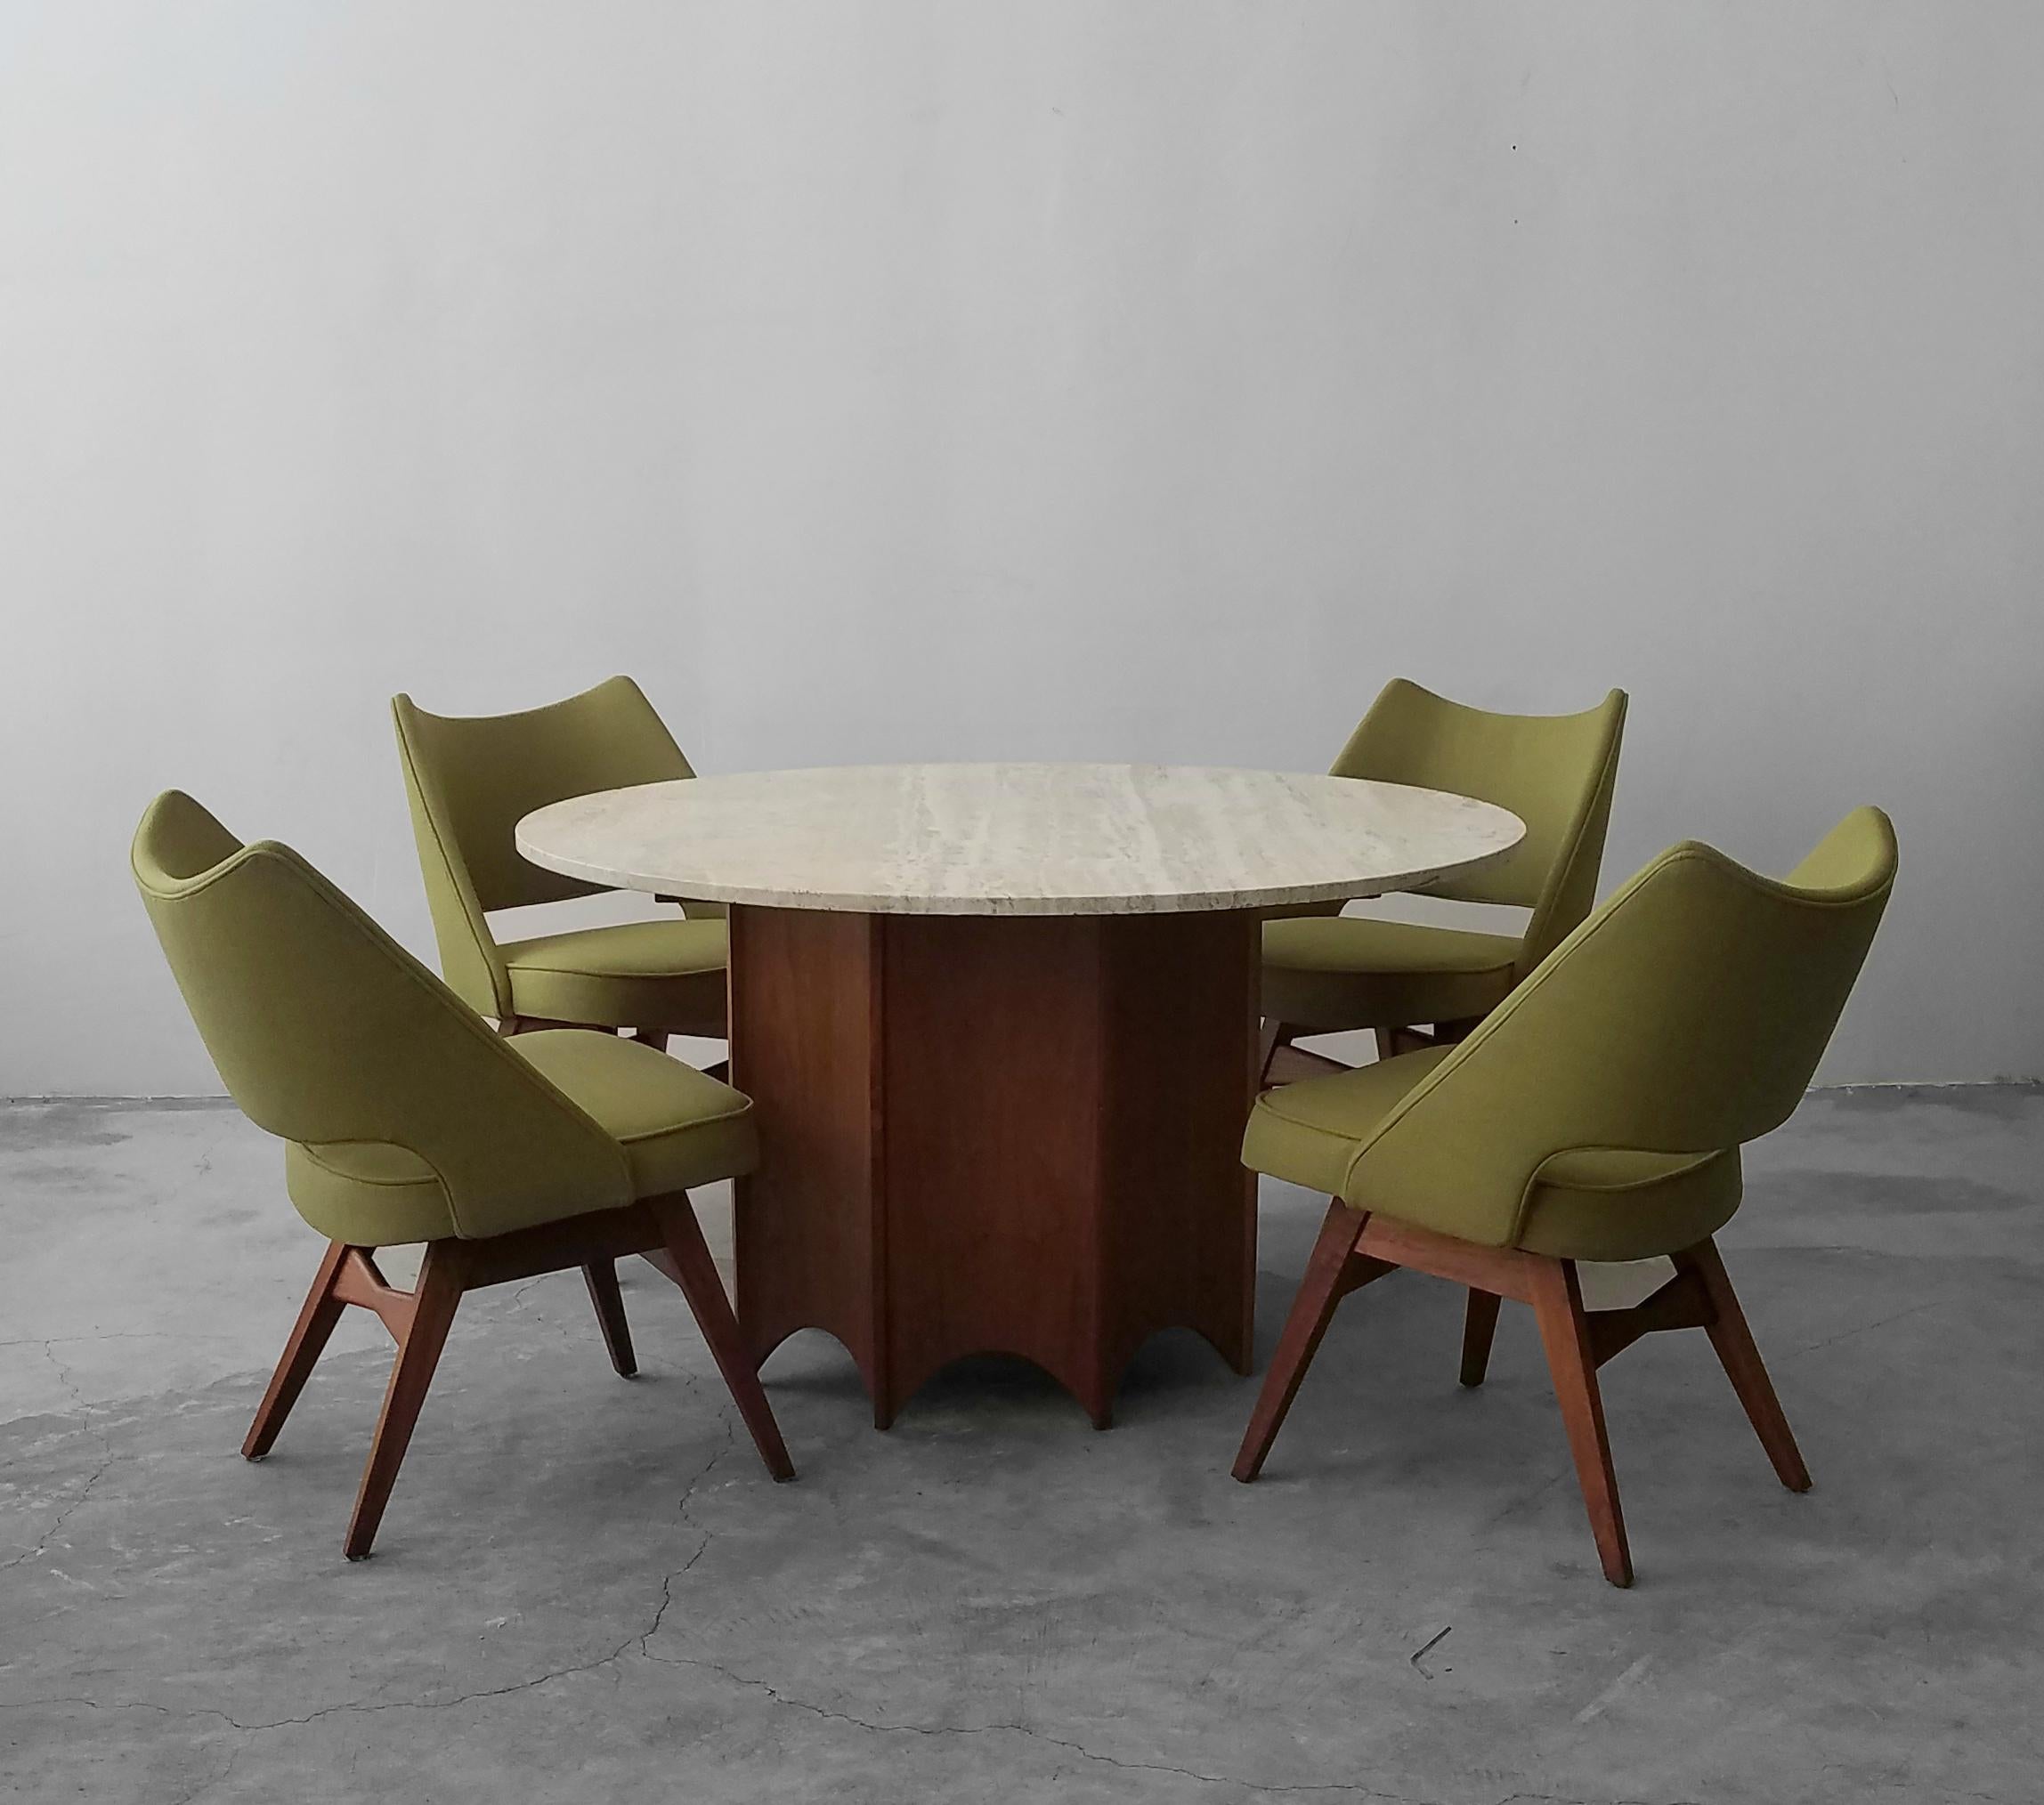 A beautiful Classic midcentury set. This gorgeous travertine and walnut game table and chairs set is a must for any true midcentury enthusiast or anyone looking for a game table that has timeless class and style. The set includes the table and 4